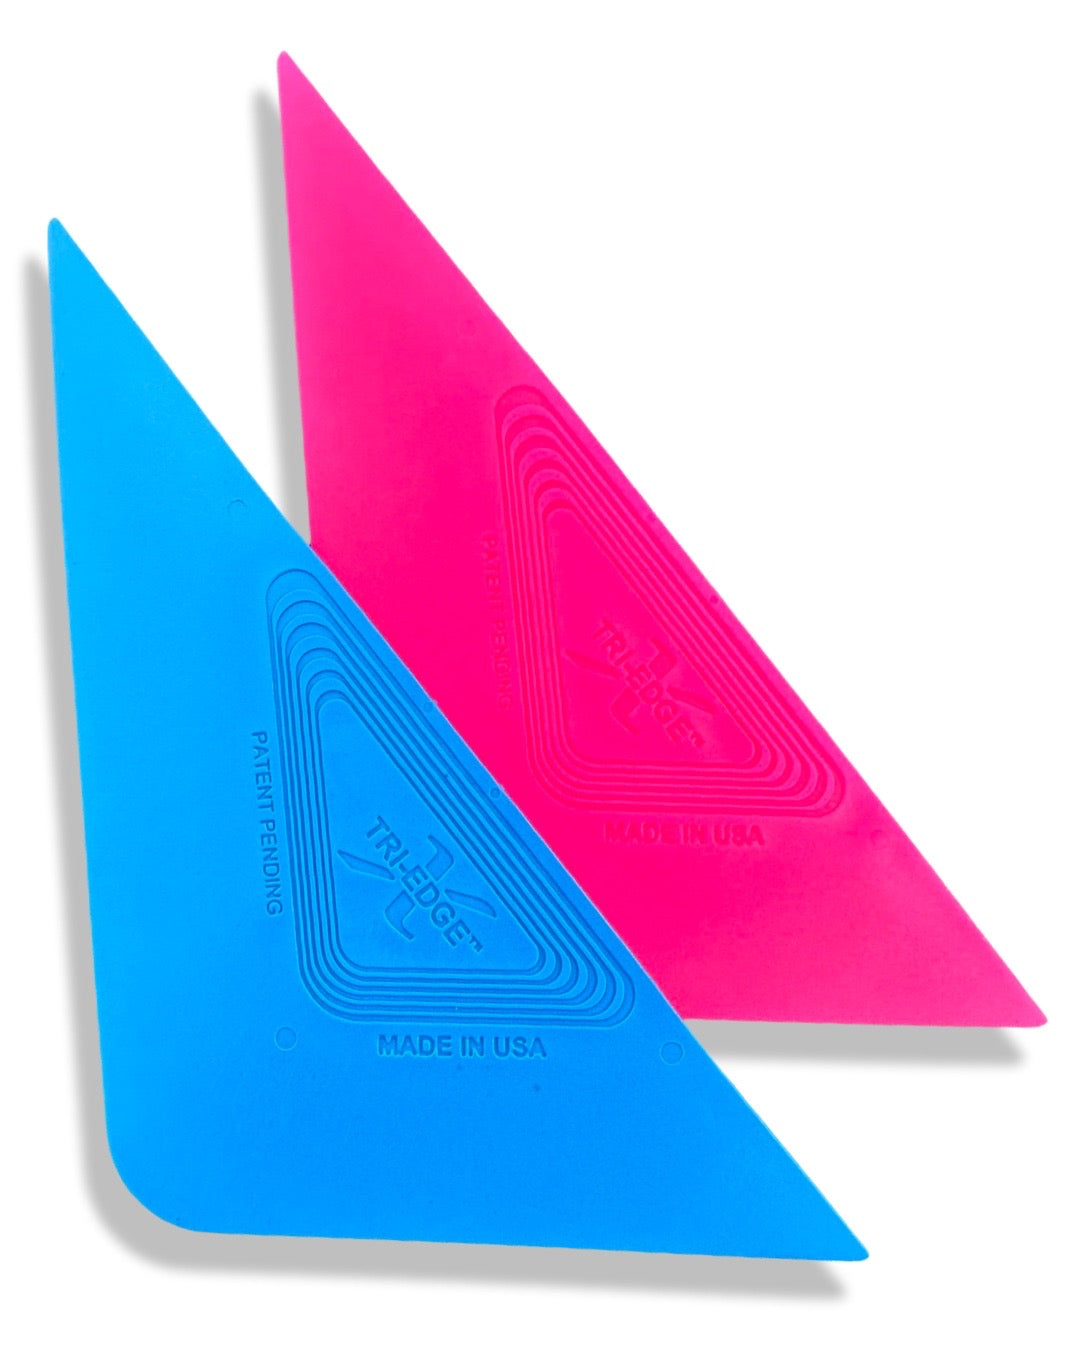 Tri Edge X for Corner and Sides (Pink or Blue)